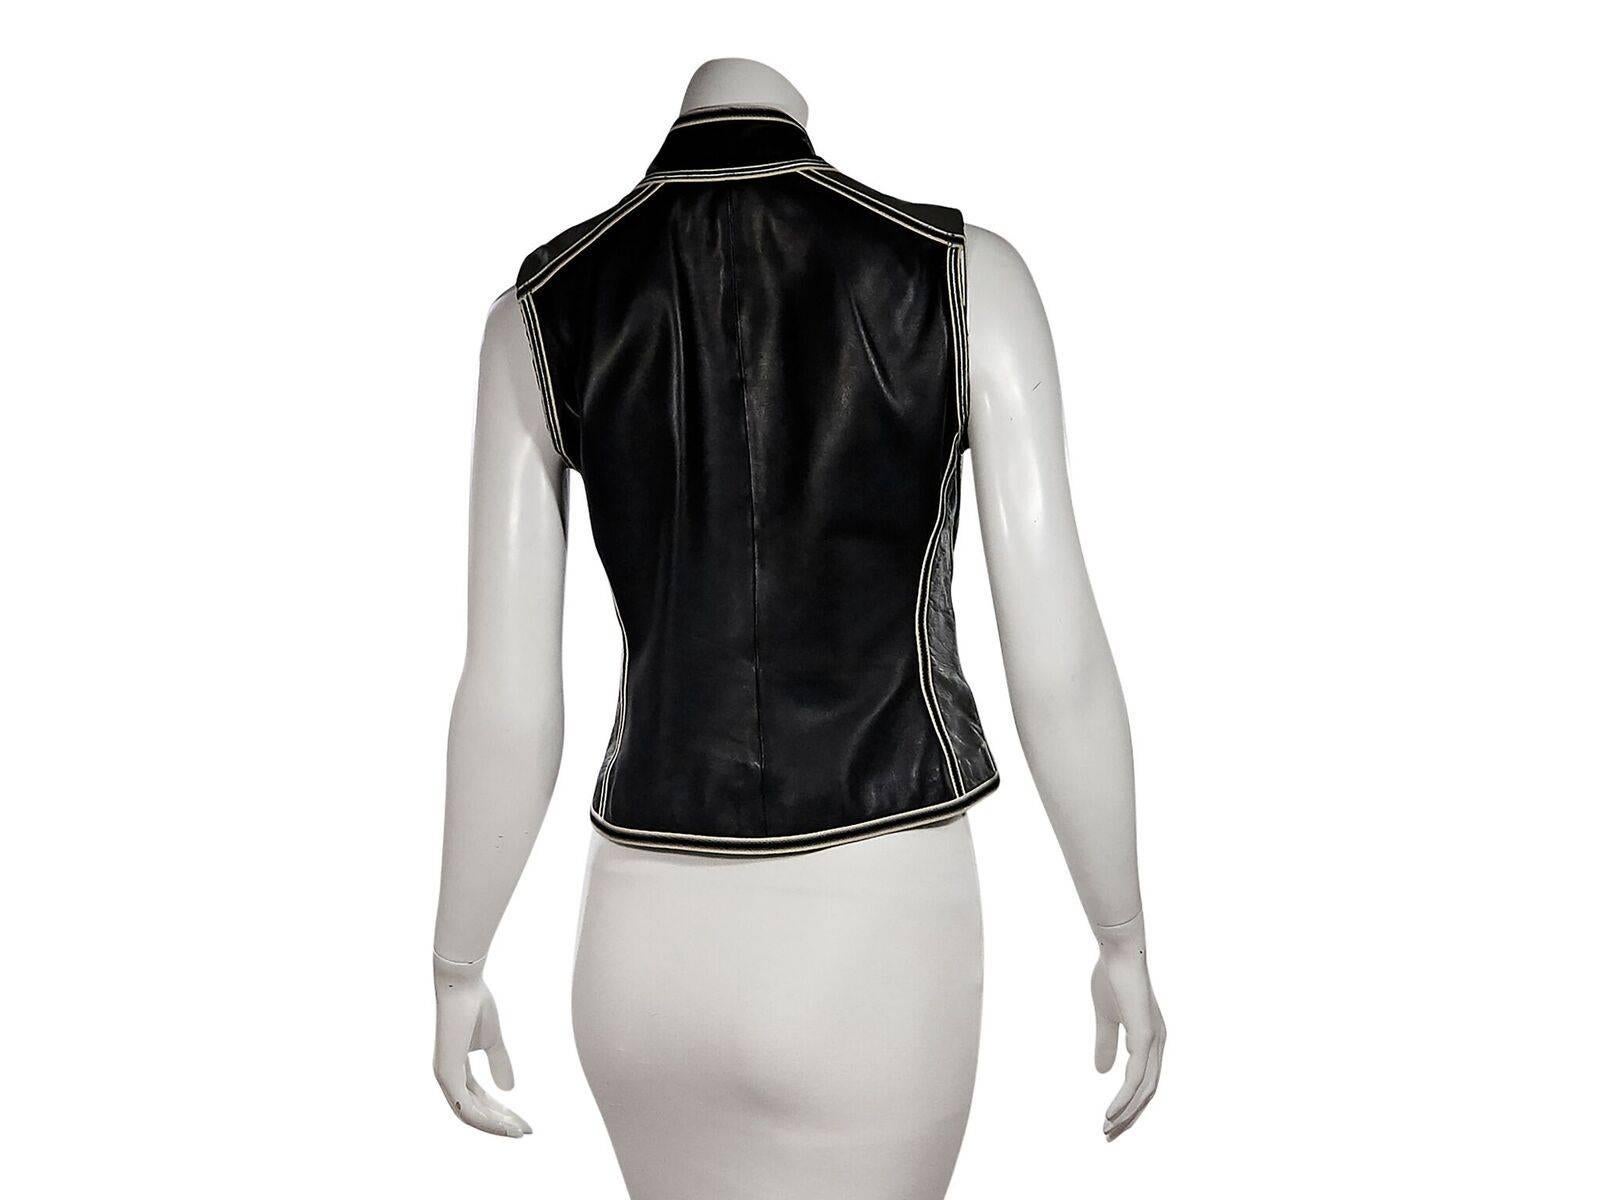 Product details:  Black leather vest by Giorgio Armani.  Accented with white topstitching.  Stand collar. Sleeveless.  Concealed zip-front closure.  36